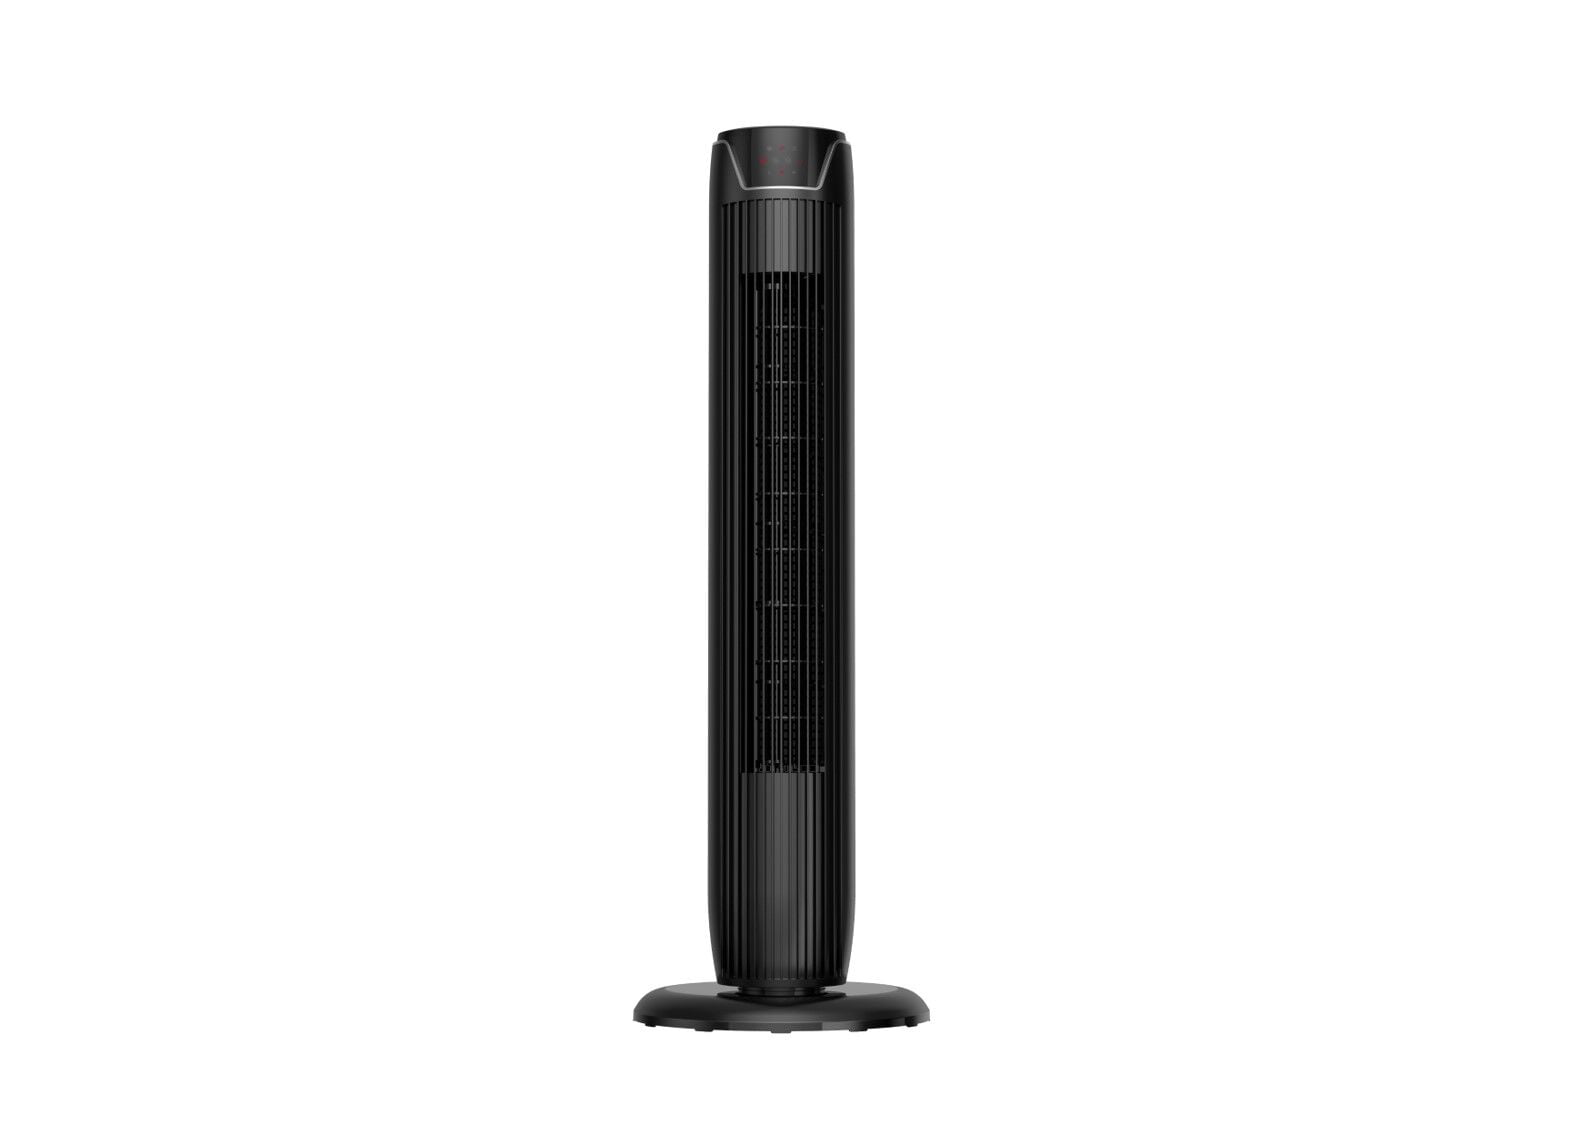 Pelonis Fz10 19jr Quiet Oscillating Tower Fan Or Heating Cooling And Air